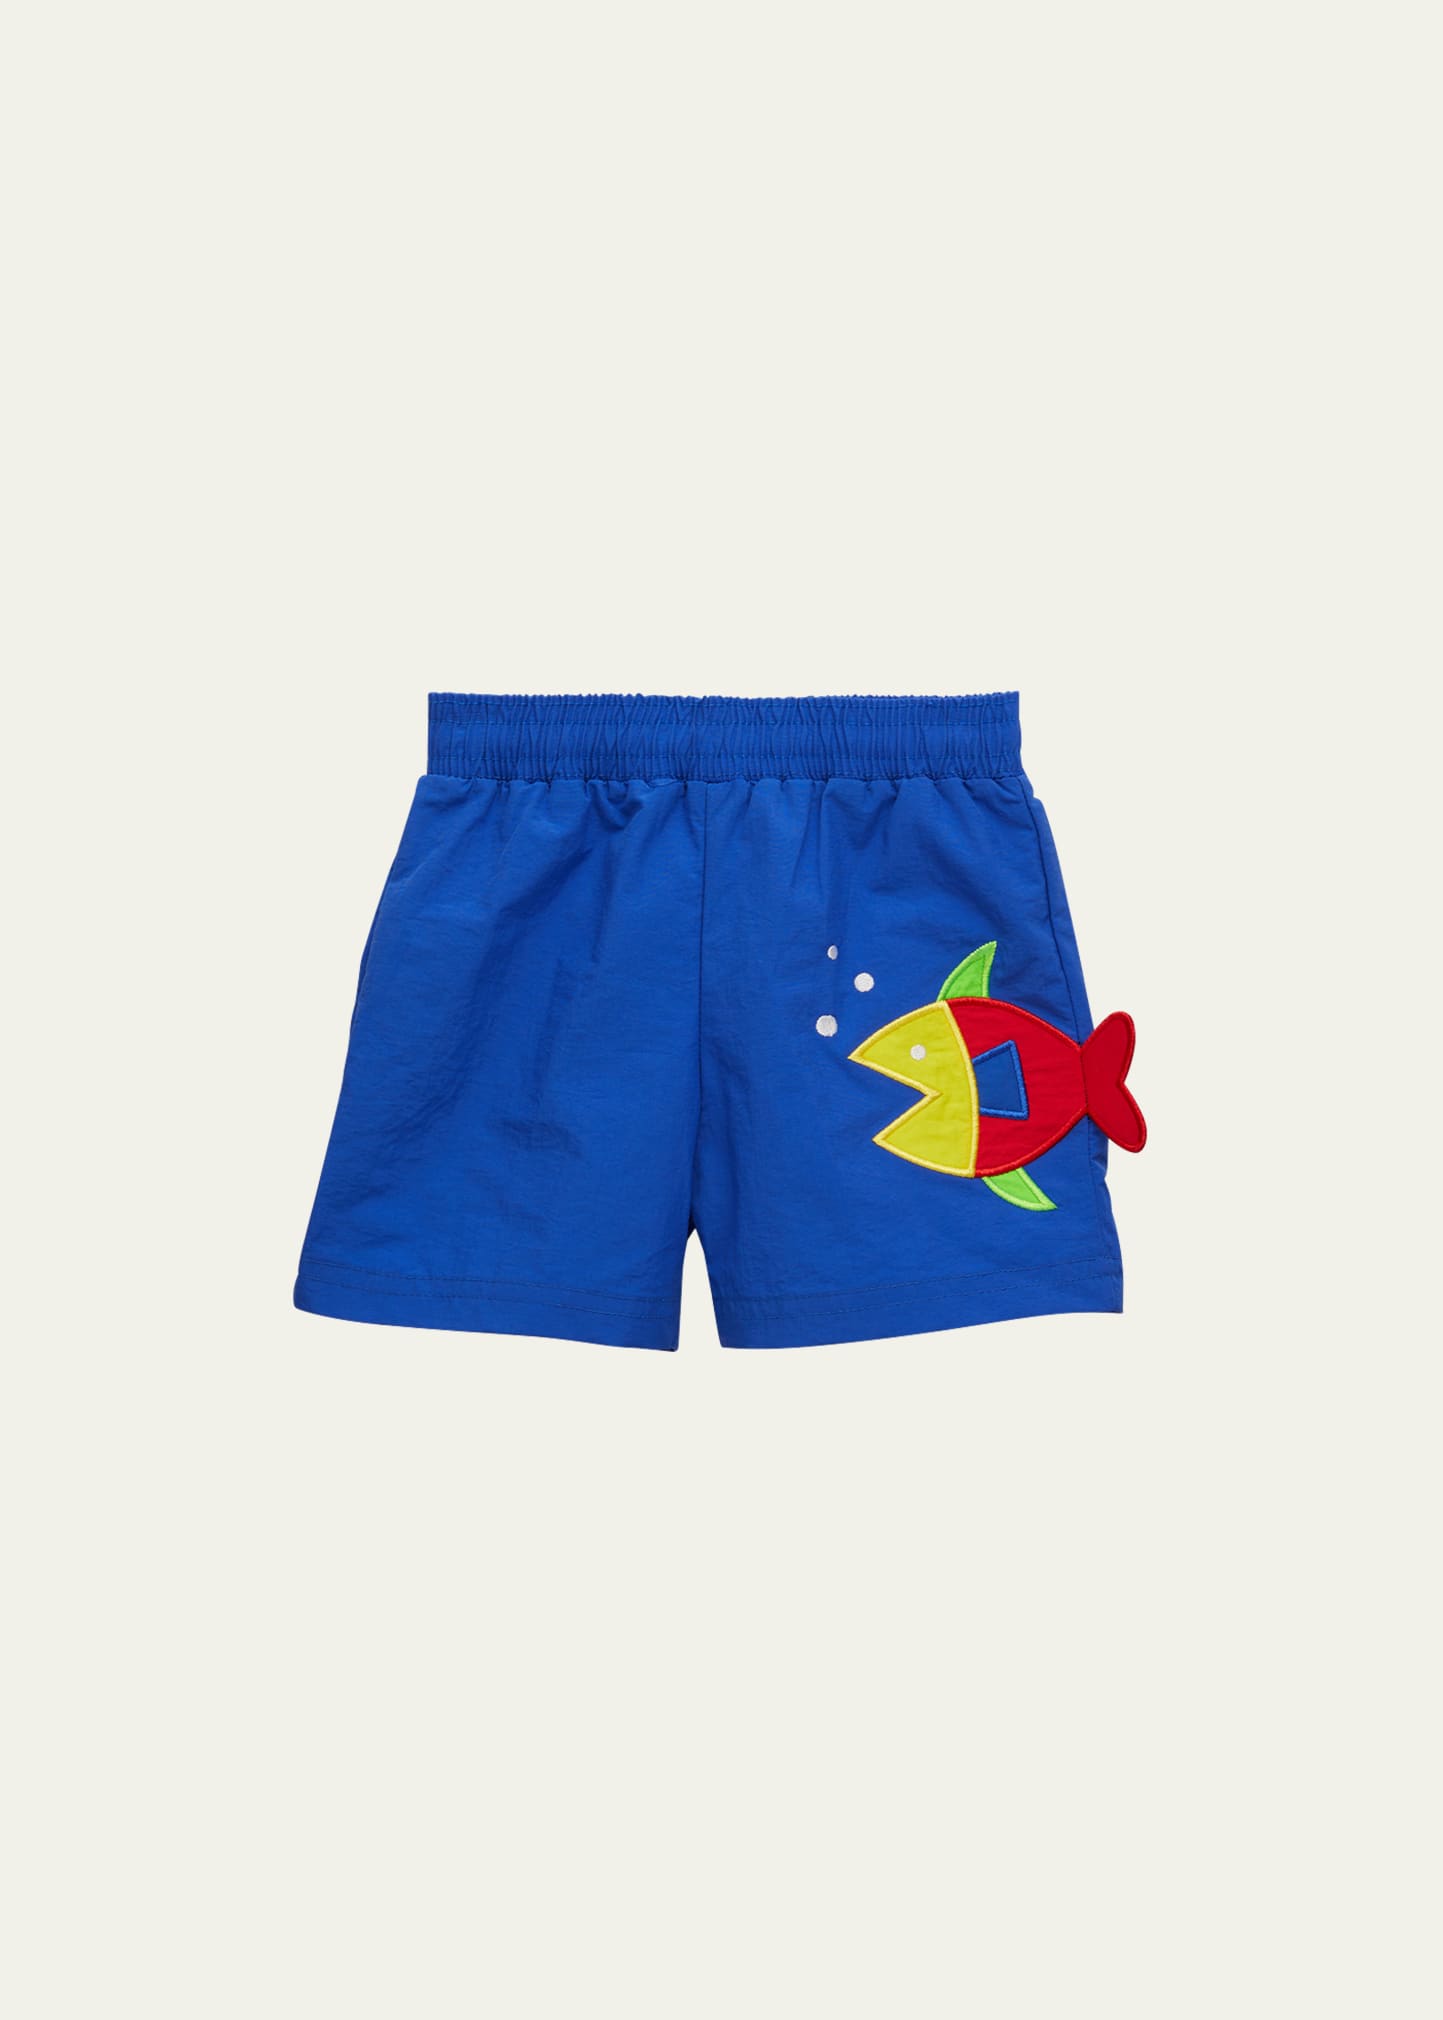 Florence Eiseman Kids' Boy's Embroidered Fish Swim Trunks In Royal